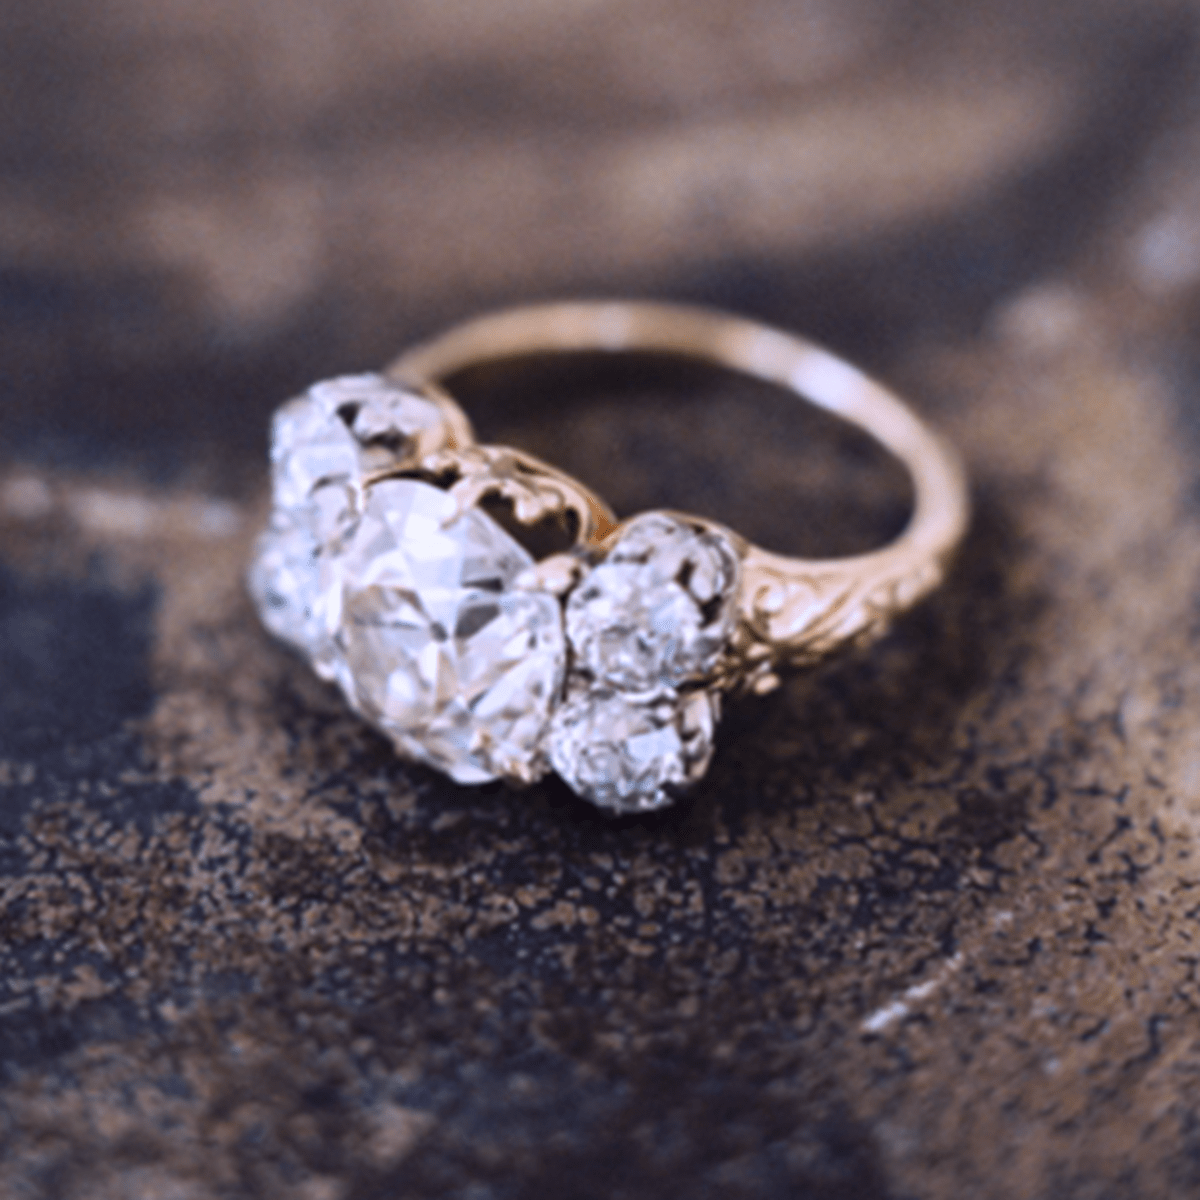 How should a wedding ring fit? - Quora